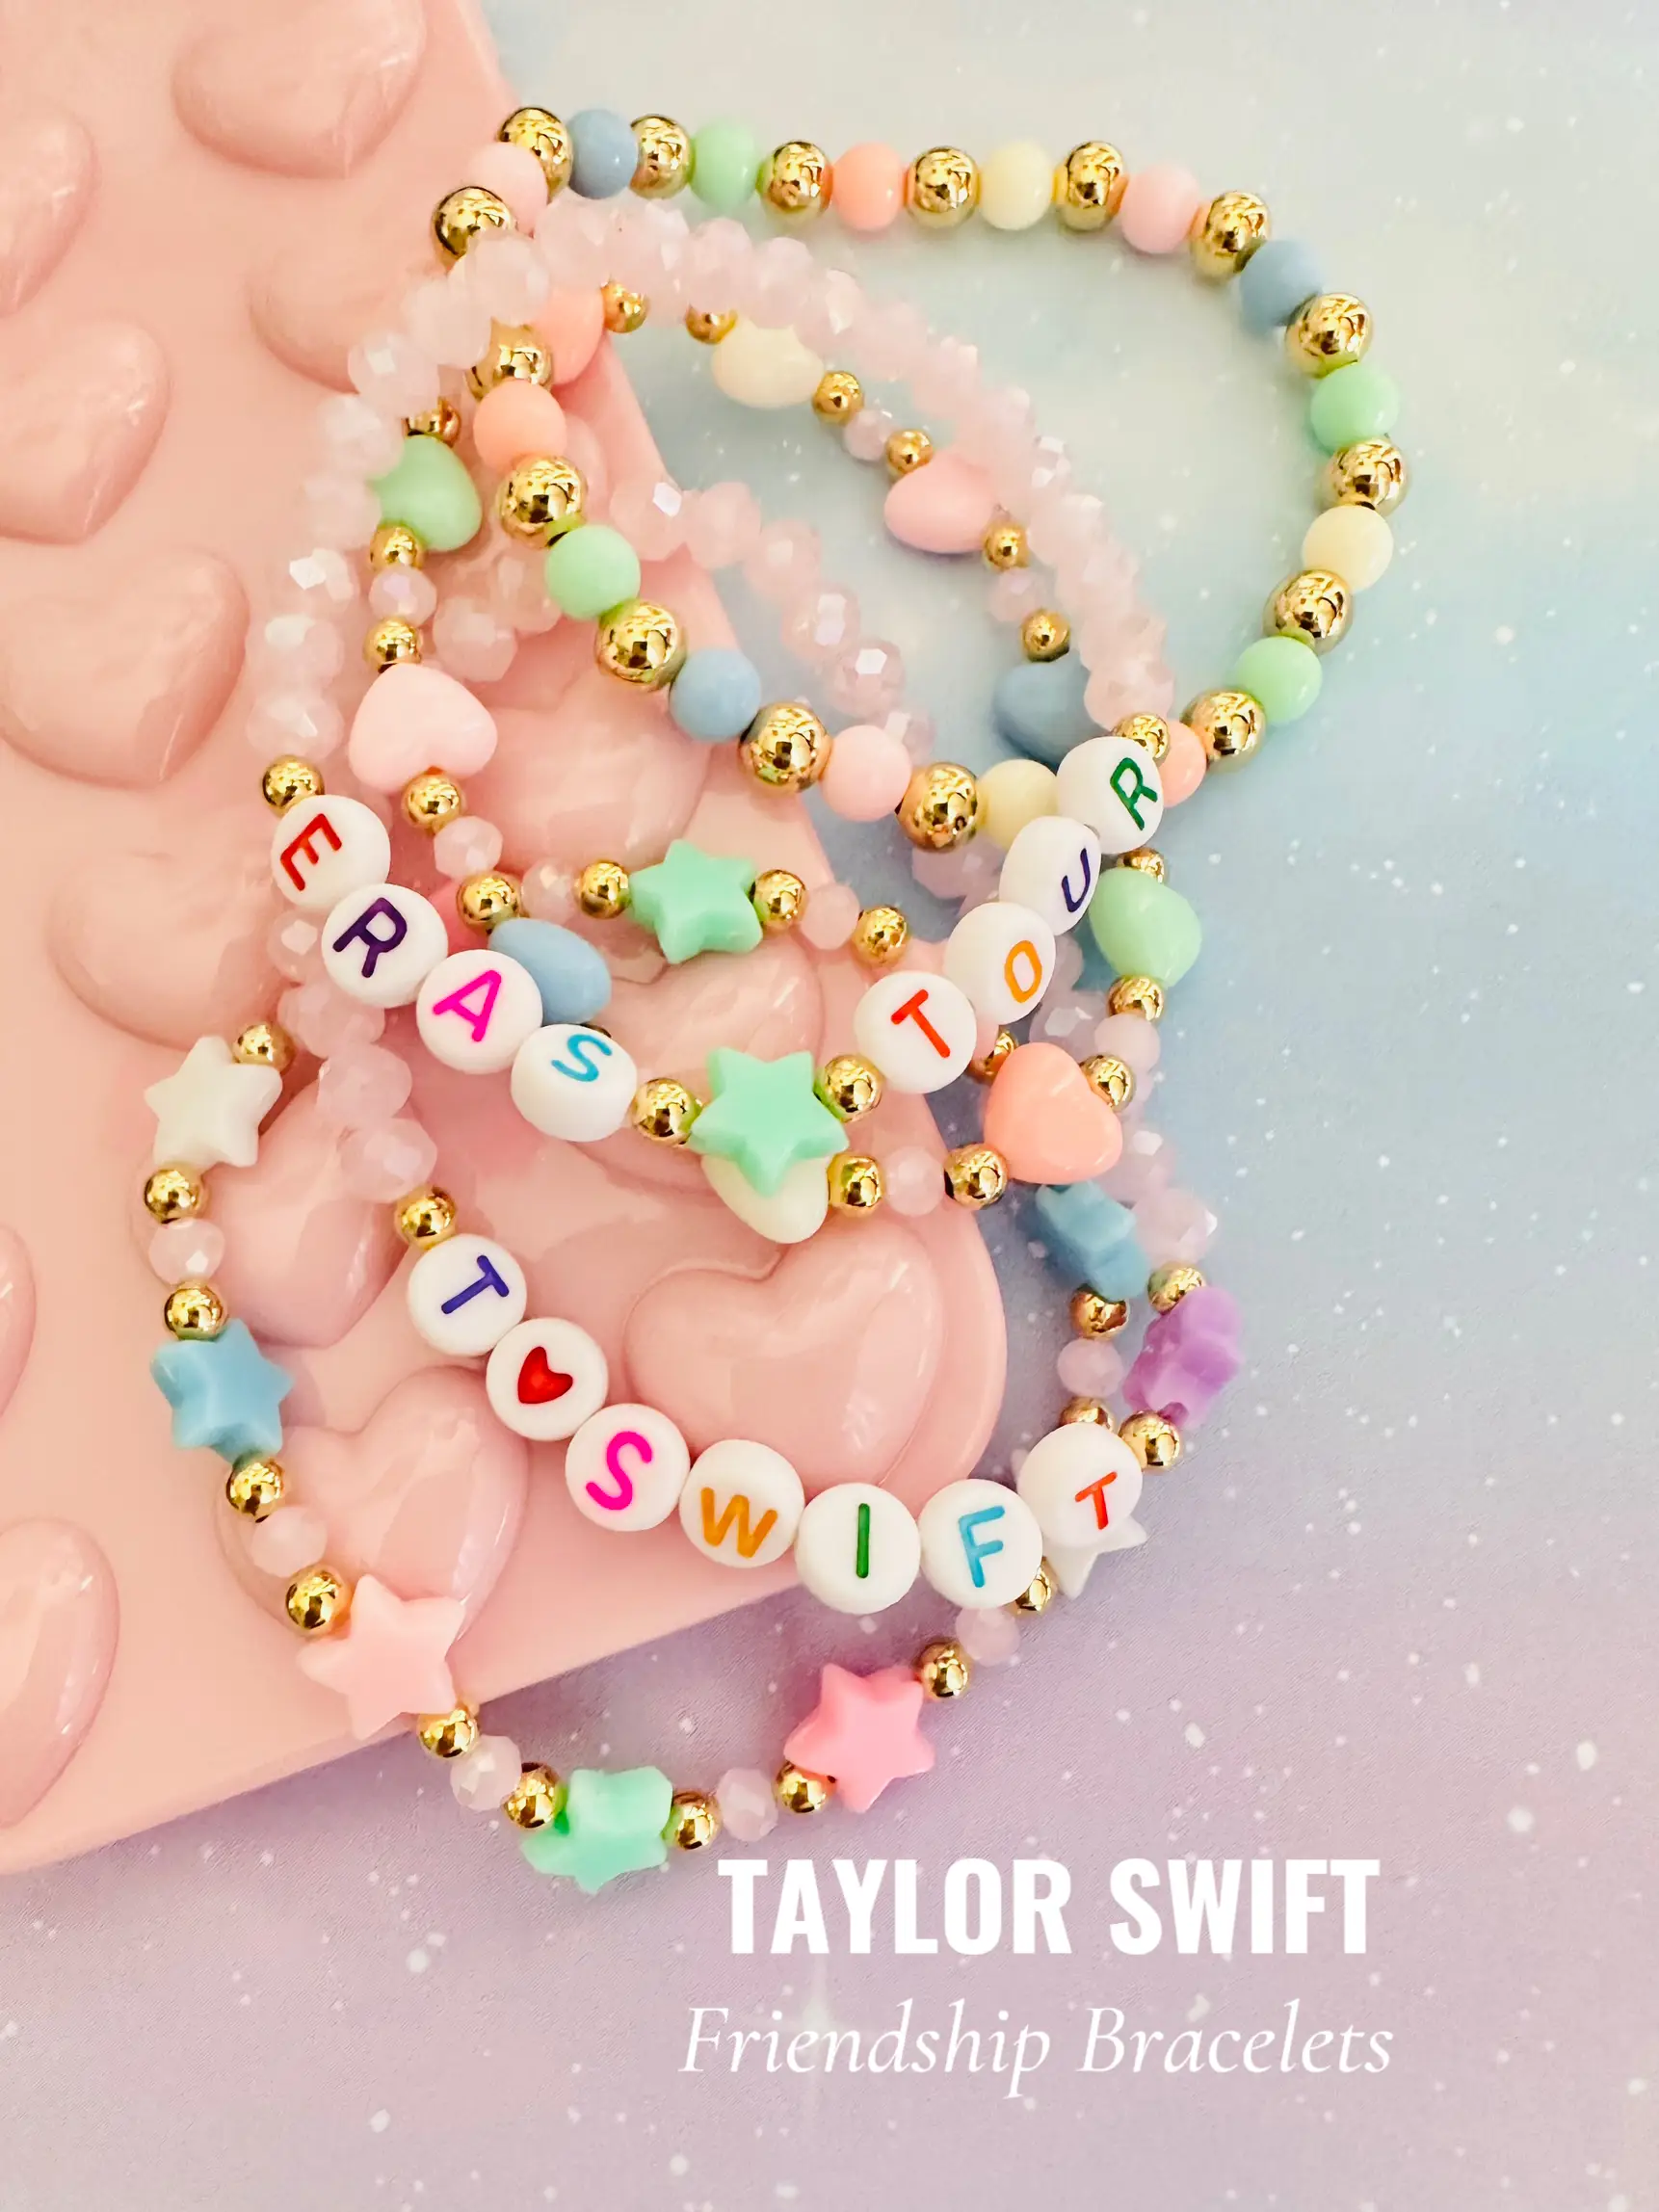 See All the Celebrities Who Swapped Friendship Bracelets at Taylor